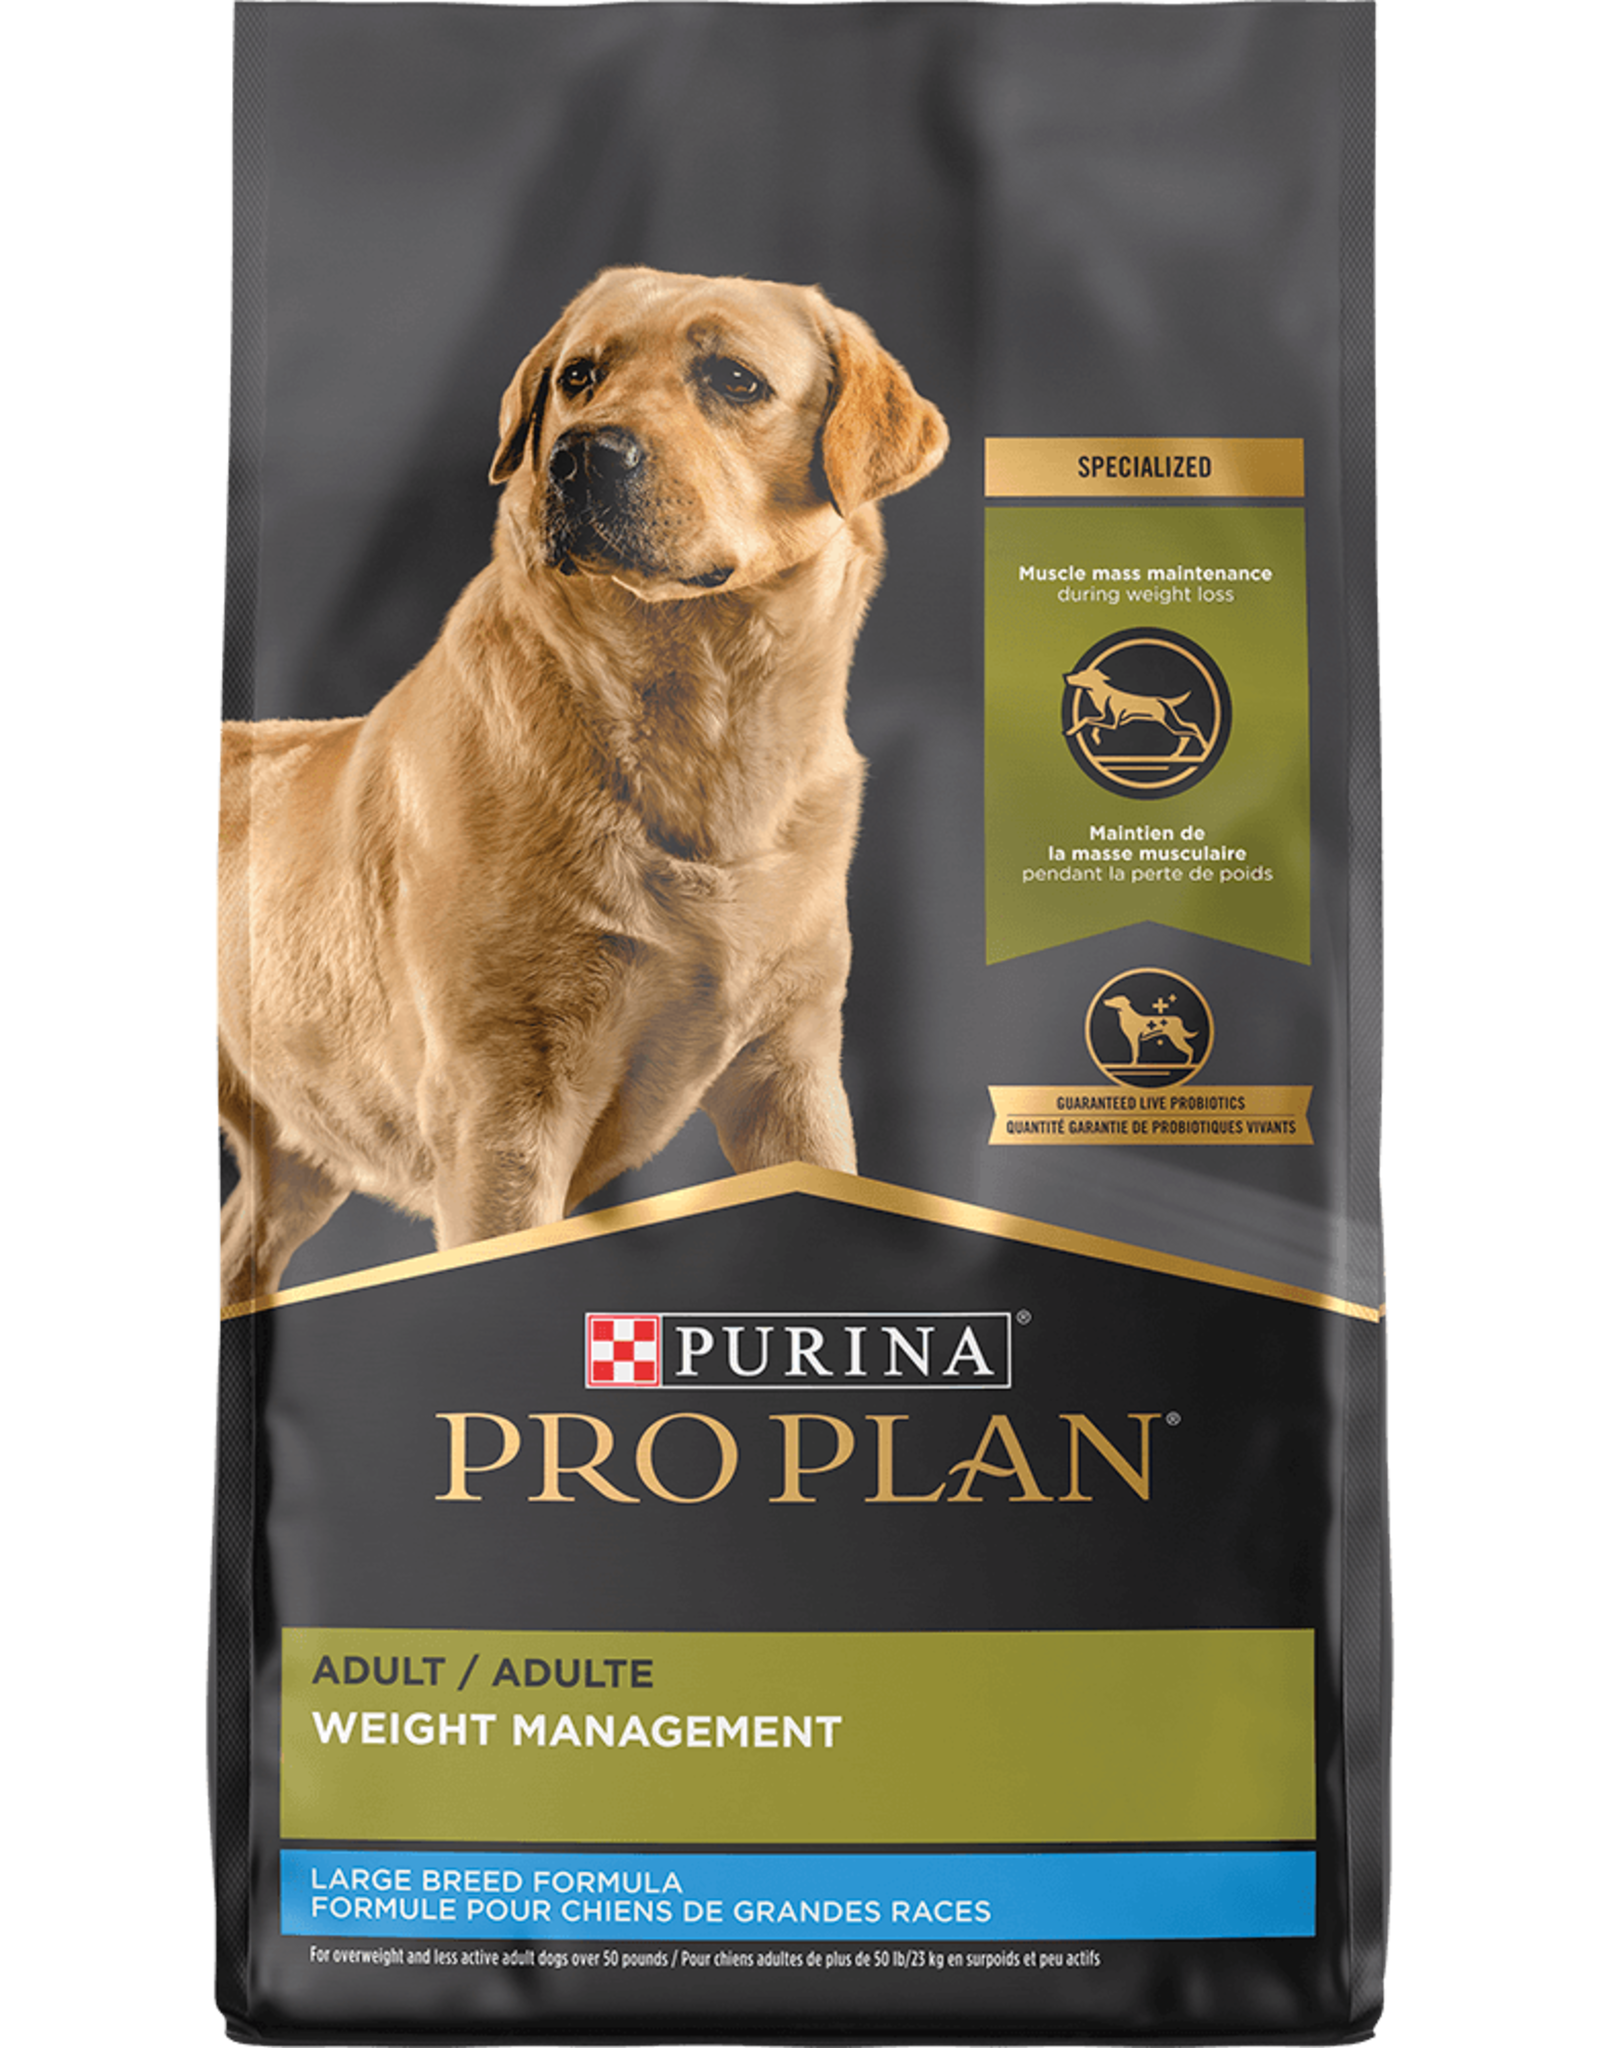 NESTLE PURINA PETCARE PRO PLAN DOG LARGE BREED WEIGHT MANAGEMENT 34LBS